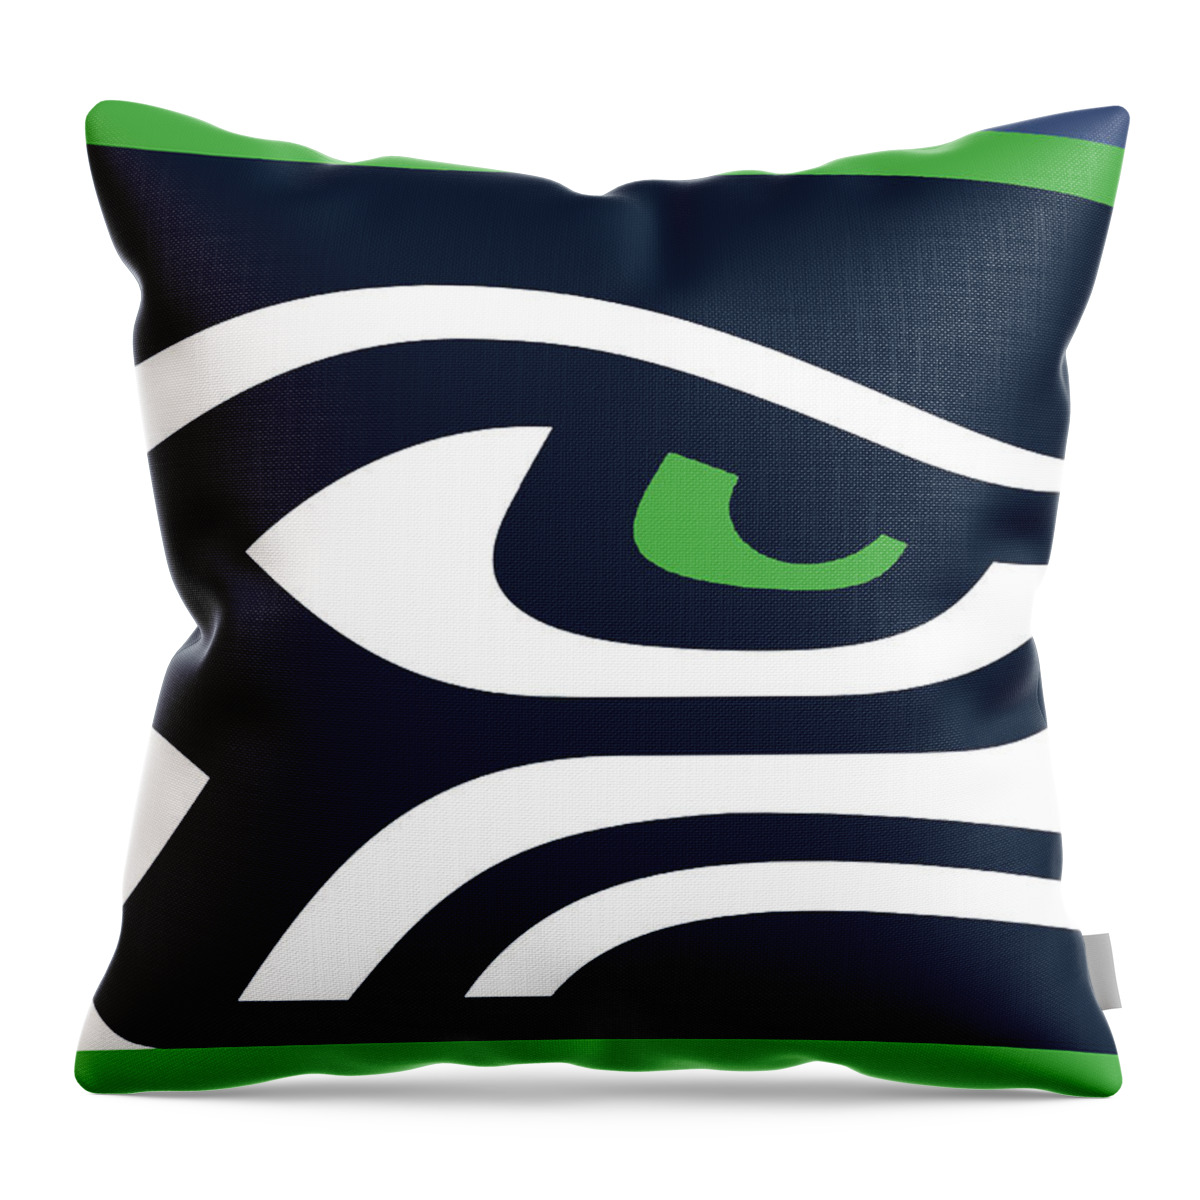 Seattle Throw Pillow featuring the painting Seattle Seahawks by Tony Rubino